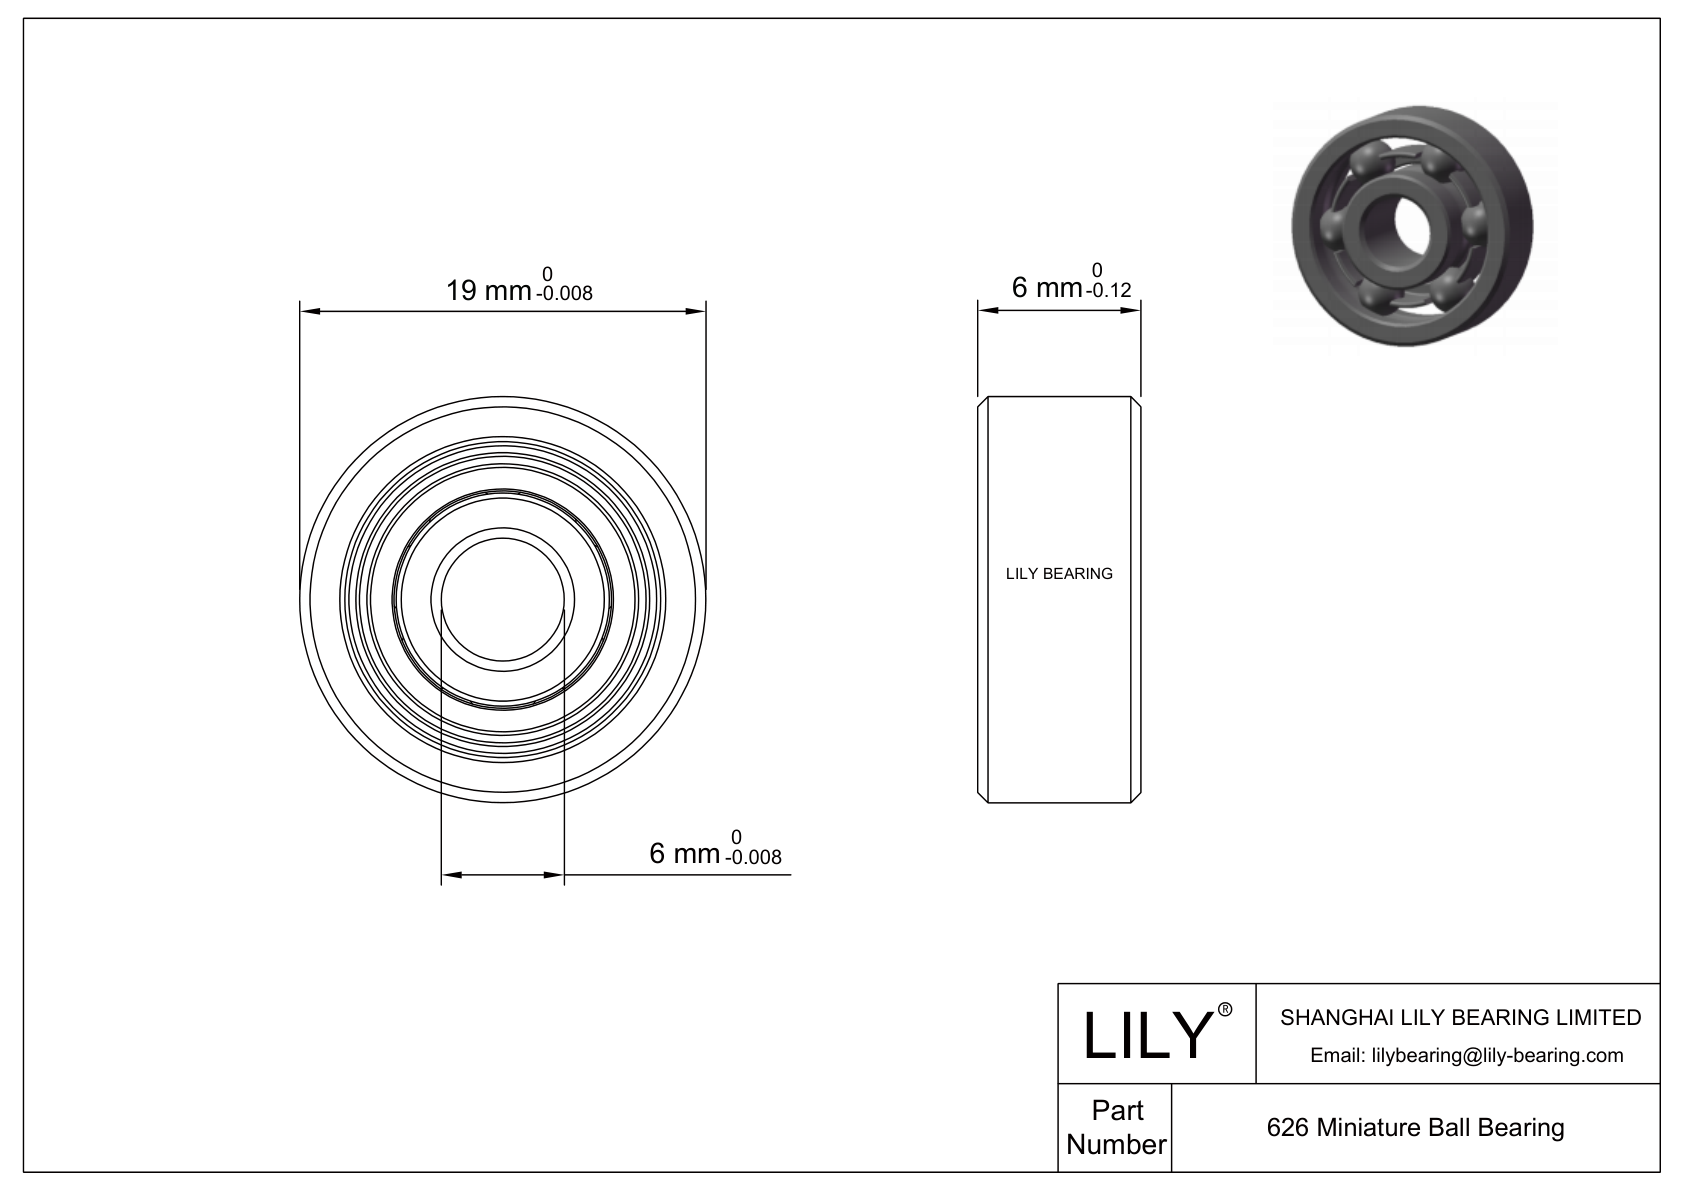 LILY-BS62628-13 POM Coated Bearing cad drawing